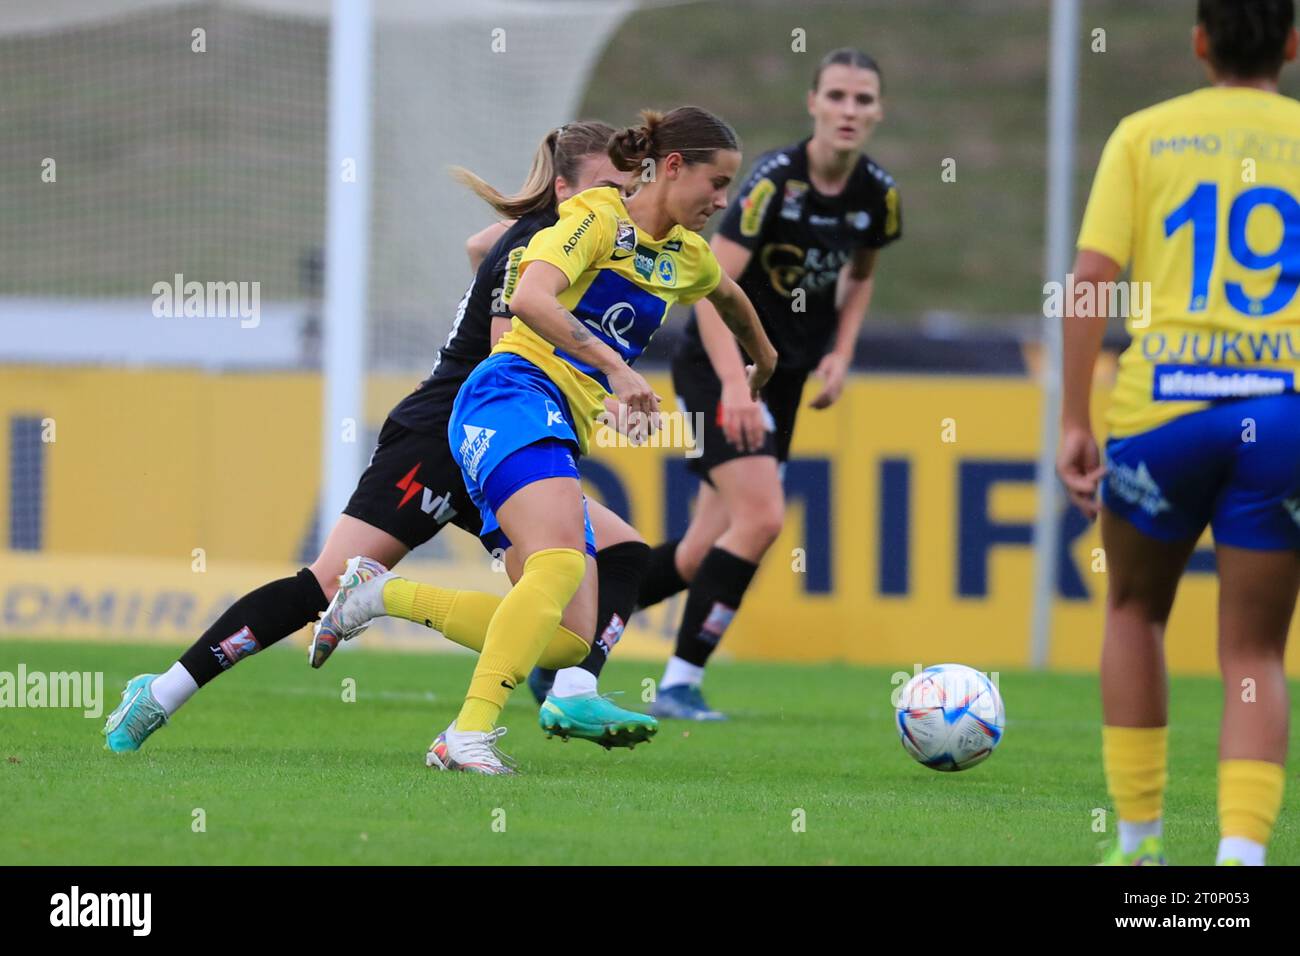 Jelena Dordic (9 First Vienna FC) in action during the Admiral Frauen Bundesliga match First Vienna FC vs SCR Altach at Hohe Warte  (Tom Seiss/ SPP) Stock Photo